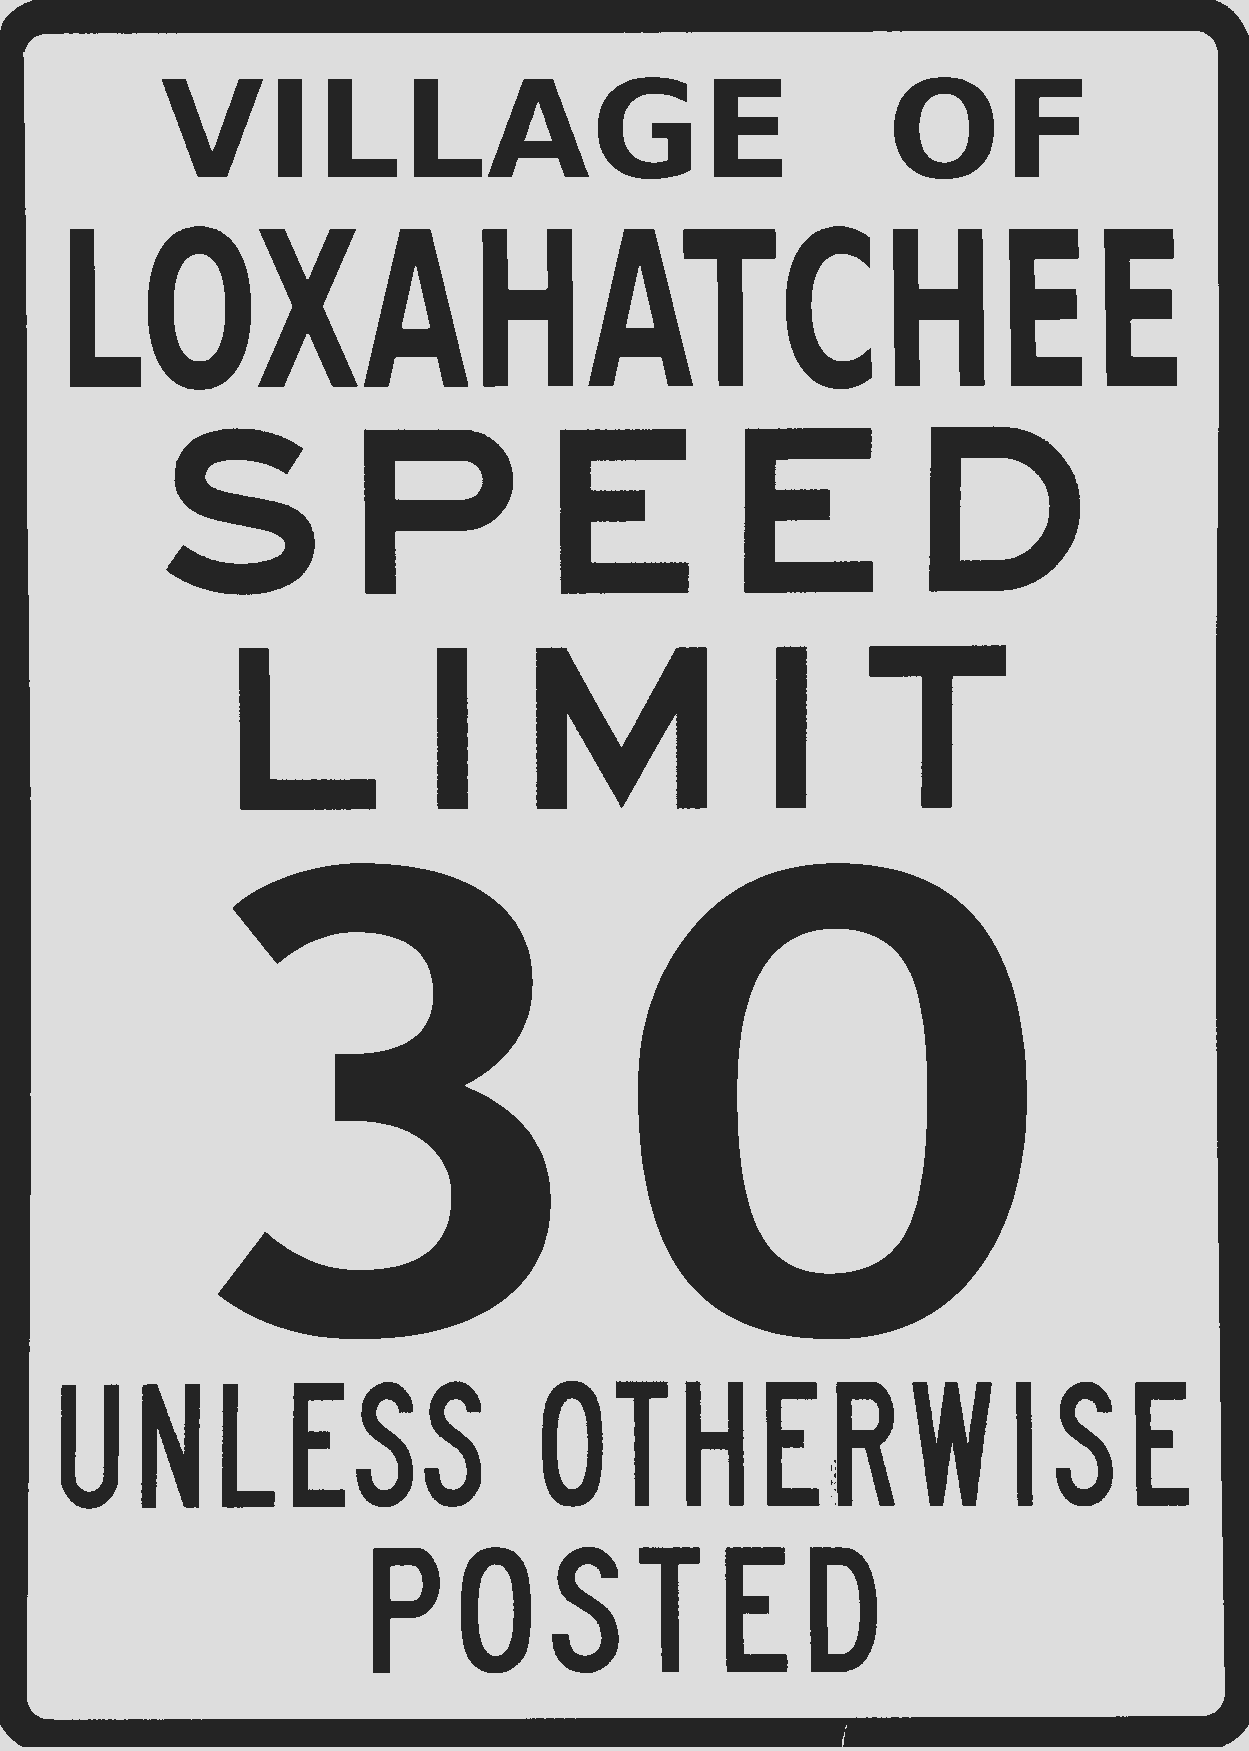 Village of Loxahatchee Speed Limit 30 Unless Otherwise Posted